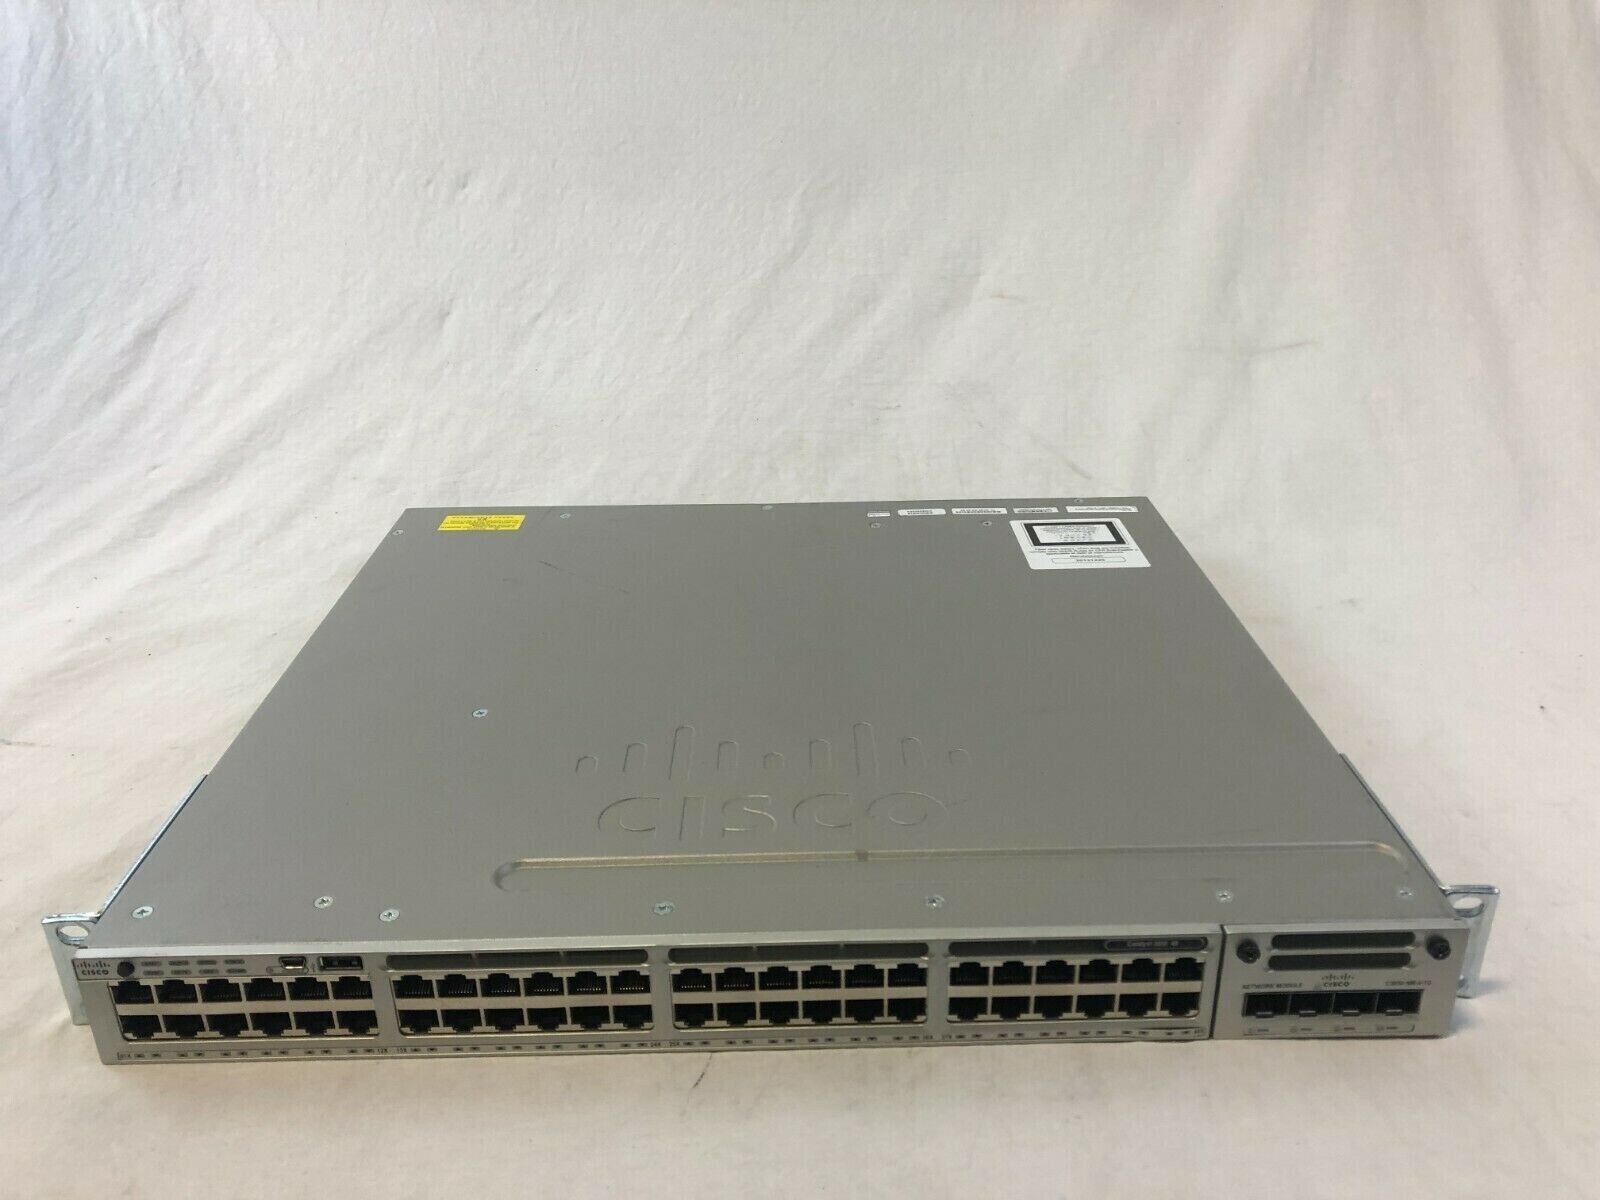 Cisco WS-C3850-48P-L 3850 Series Switch With C3850-NM-4-1G and Single Pwr Sply